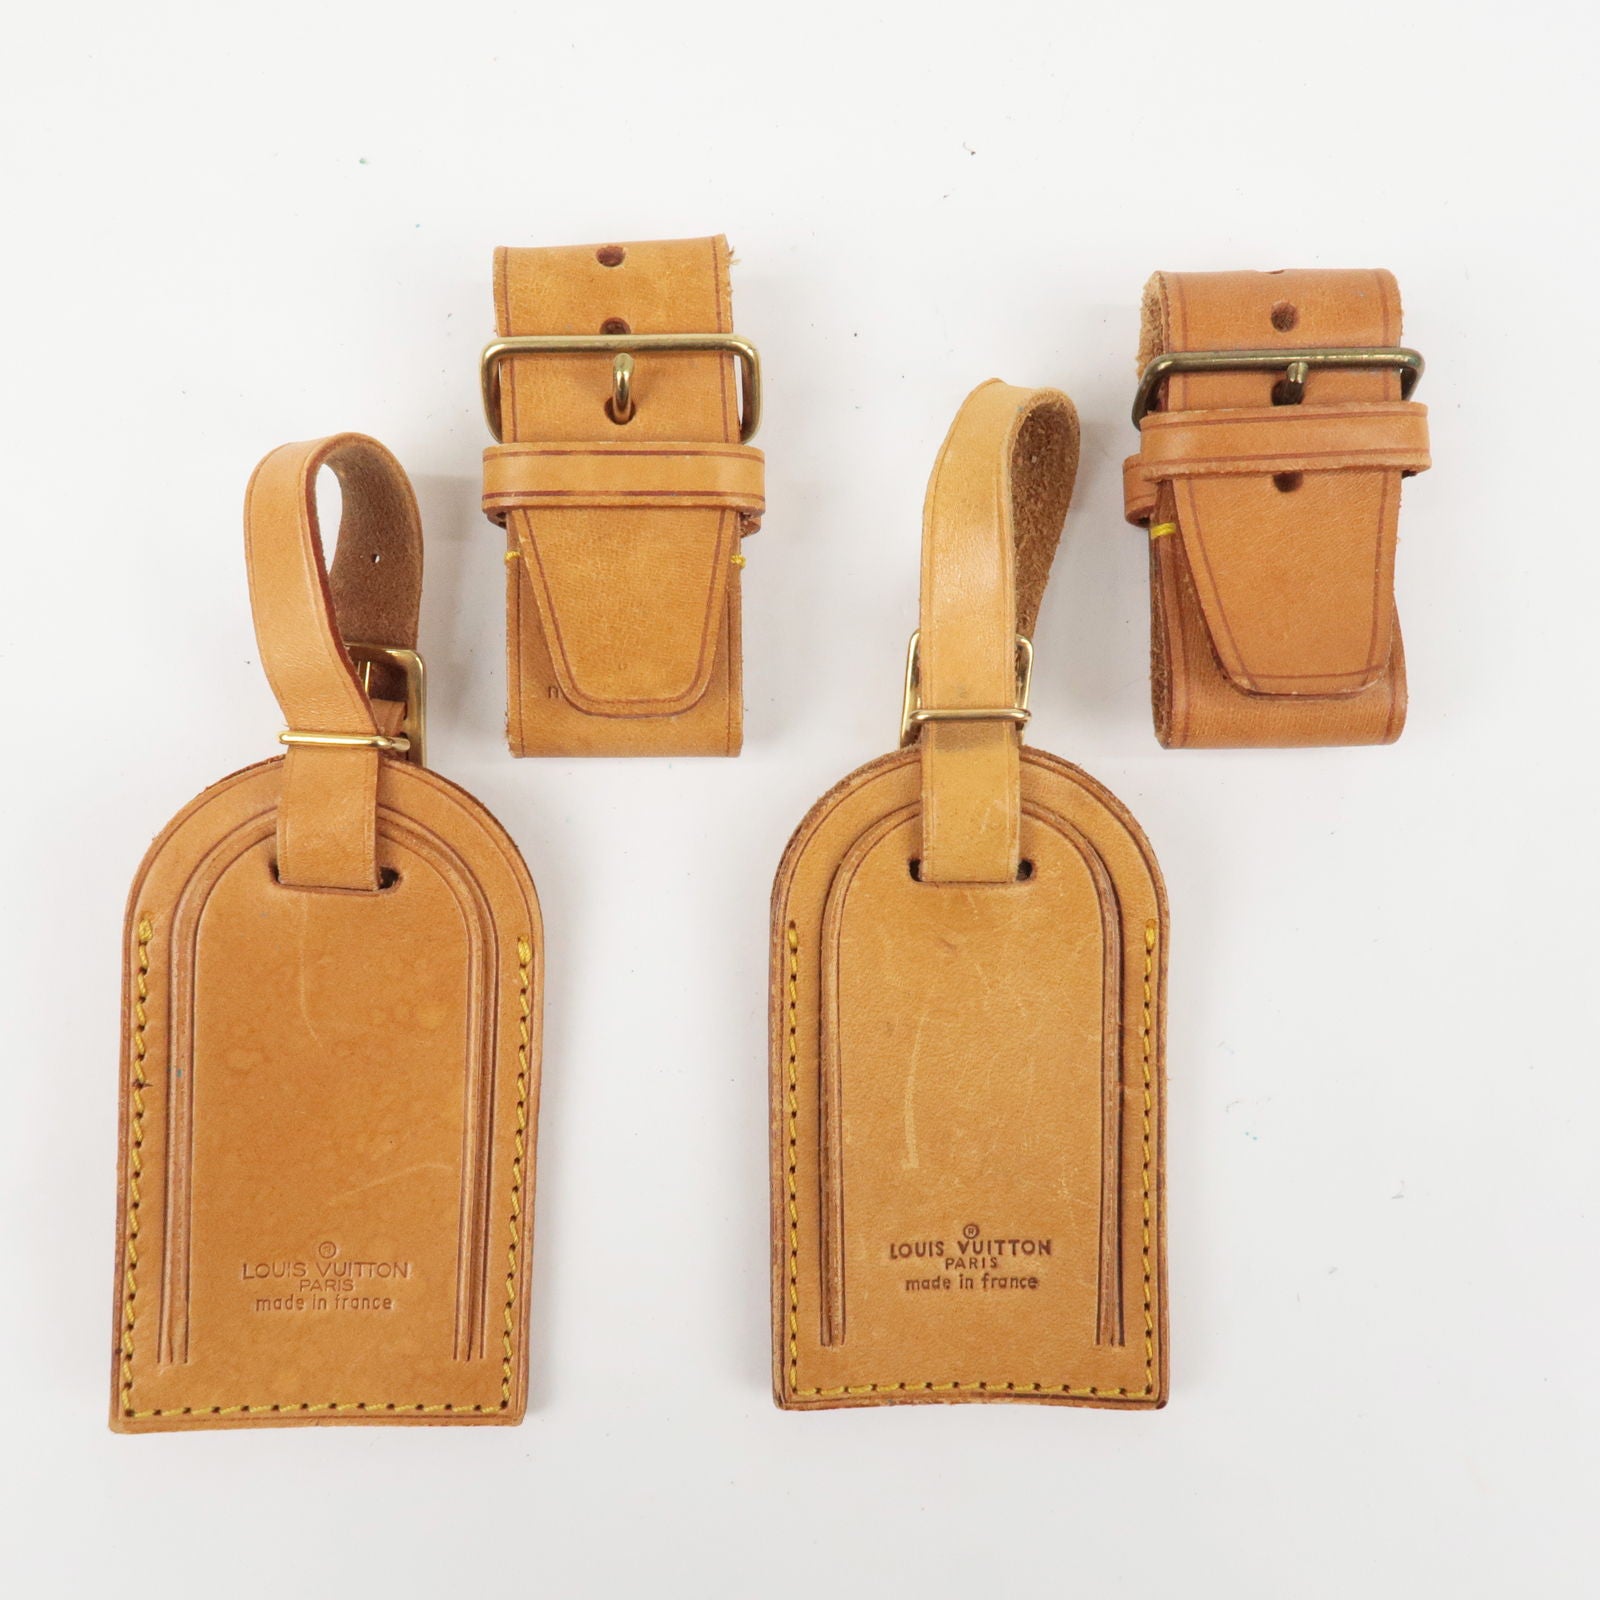 Vintage Louis Vuitton Luggage Tag and Poignier in Vachetta Leather